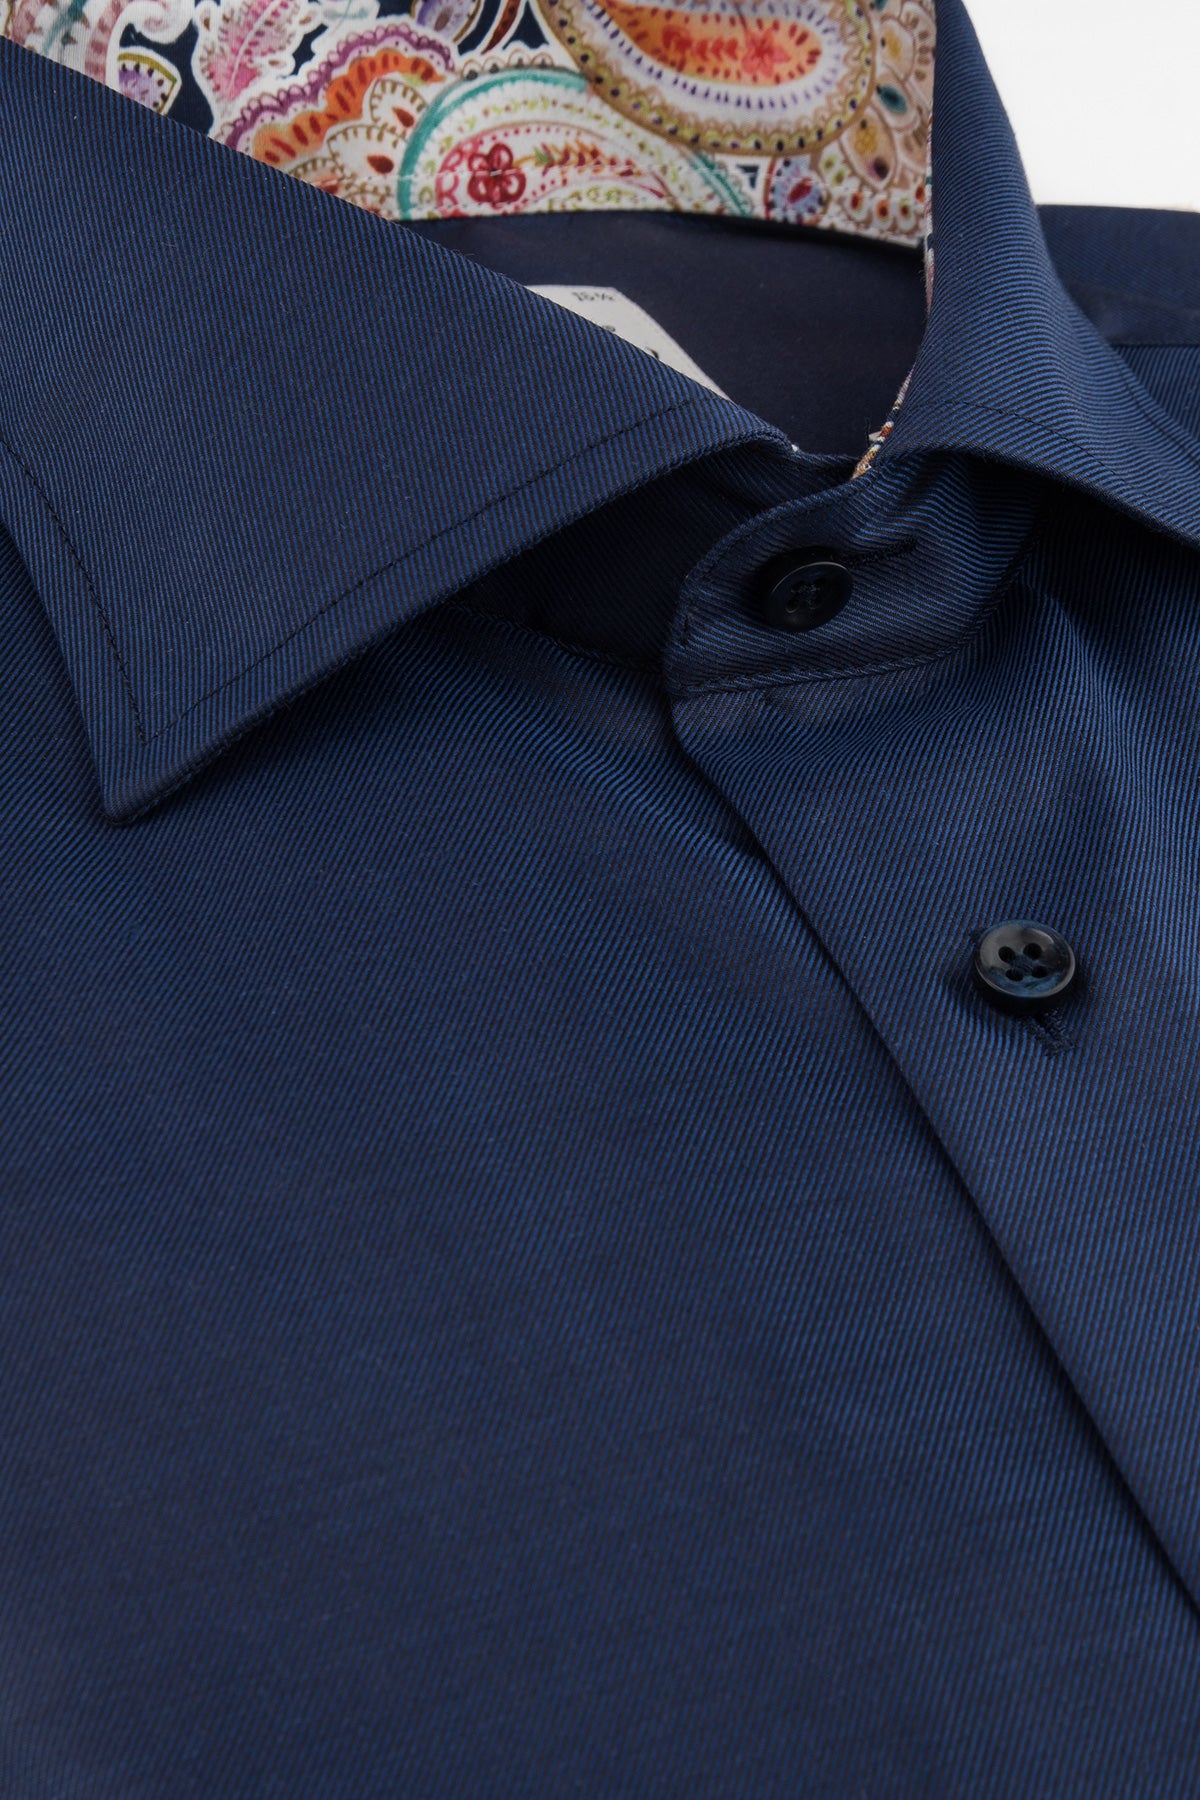 Navy regular fit shirt with extra long sleeves and contrast details